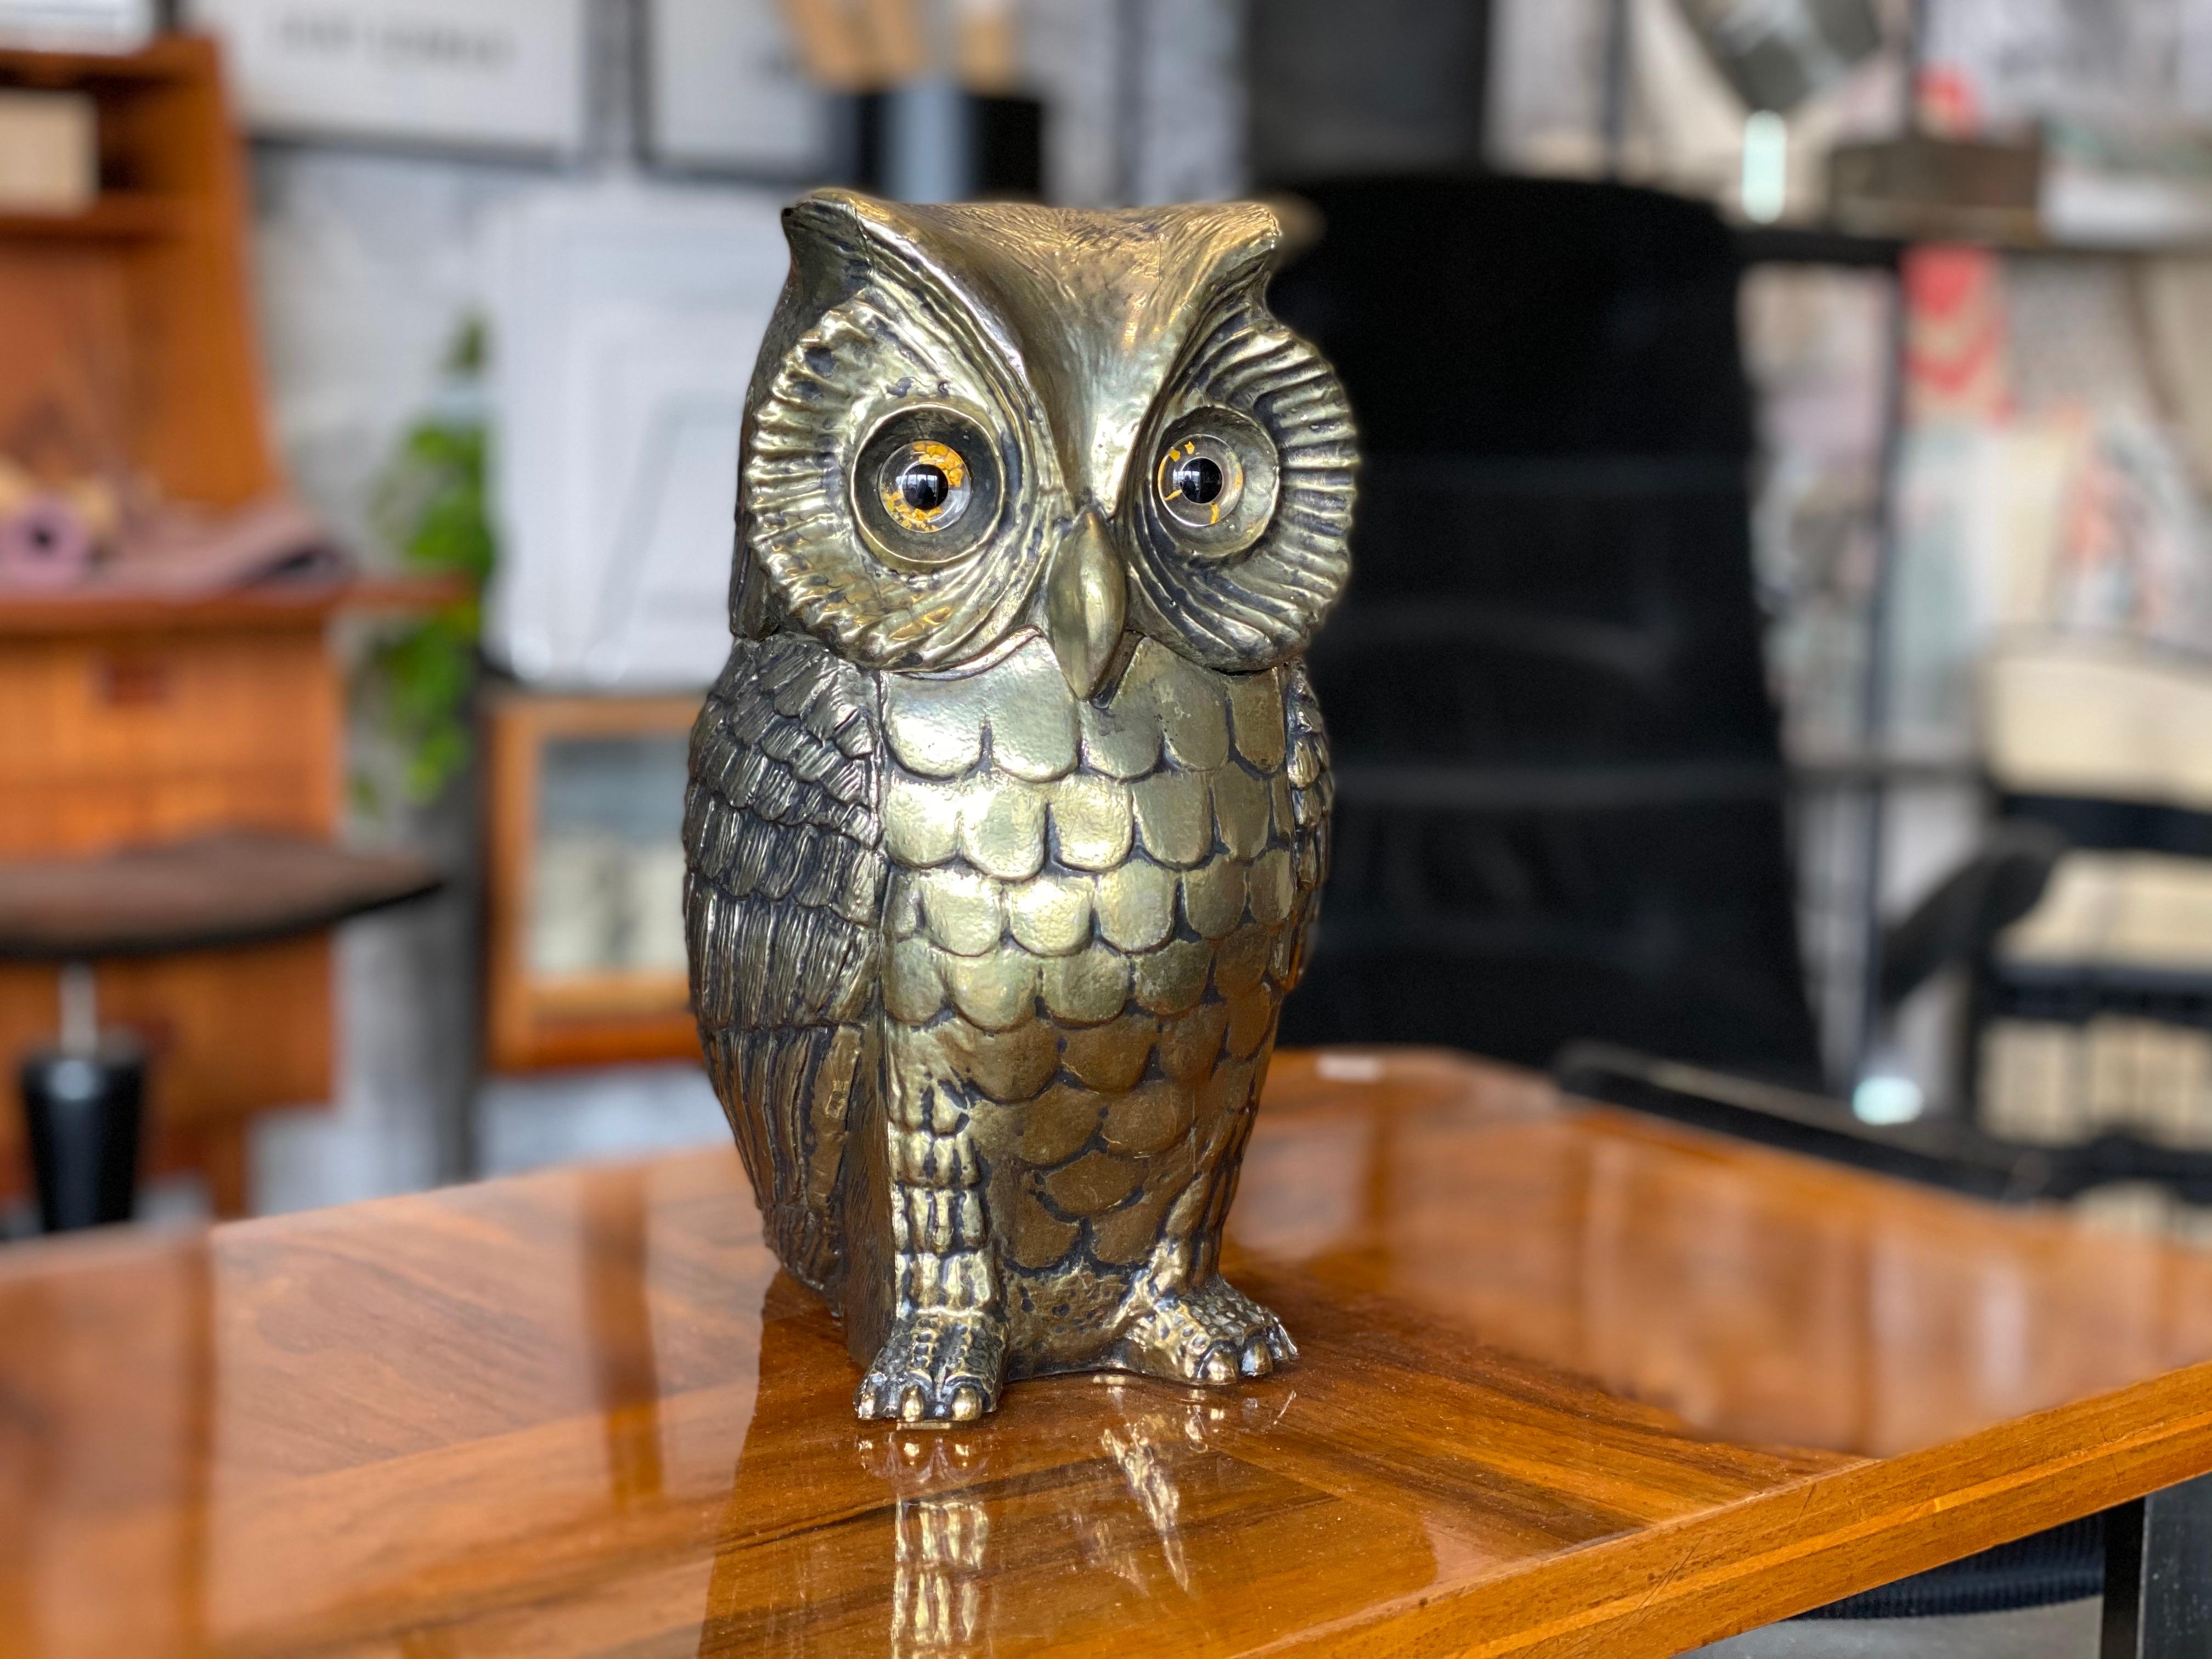 Beautiful golden owl ice bucket designed by Hans Turnwald for the Swiss company Freddo Therm from the 1970s. This detailed ice bucket in the shape of an owl is a beautiful, luxurious addition to the home bar or simply as a special decoration for the